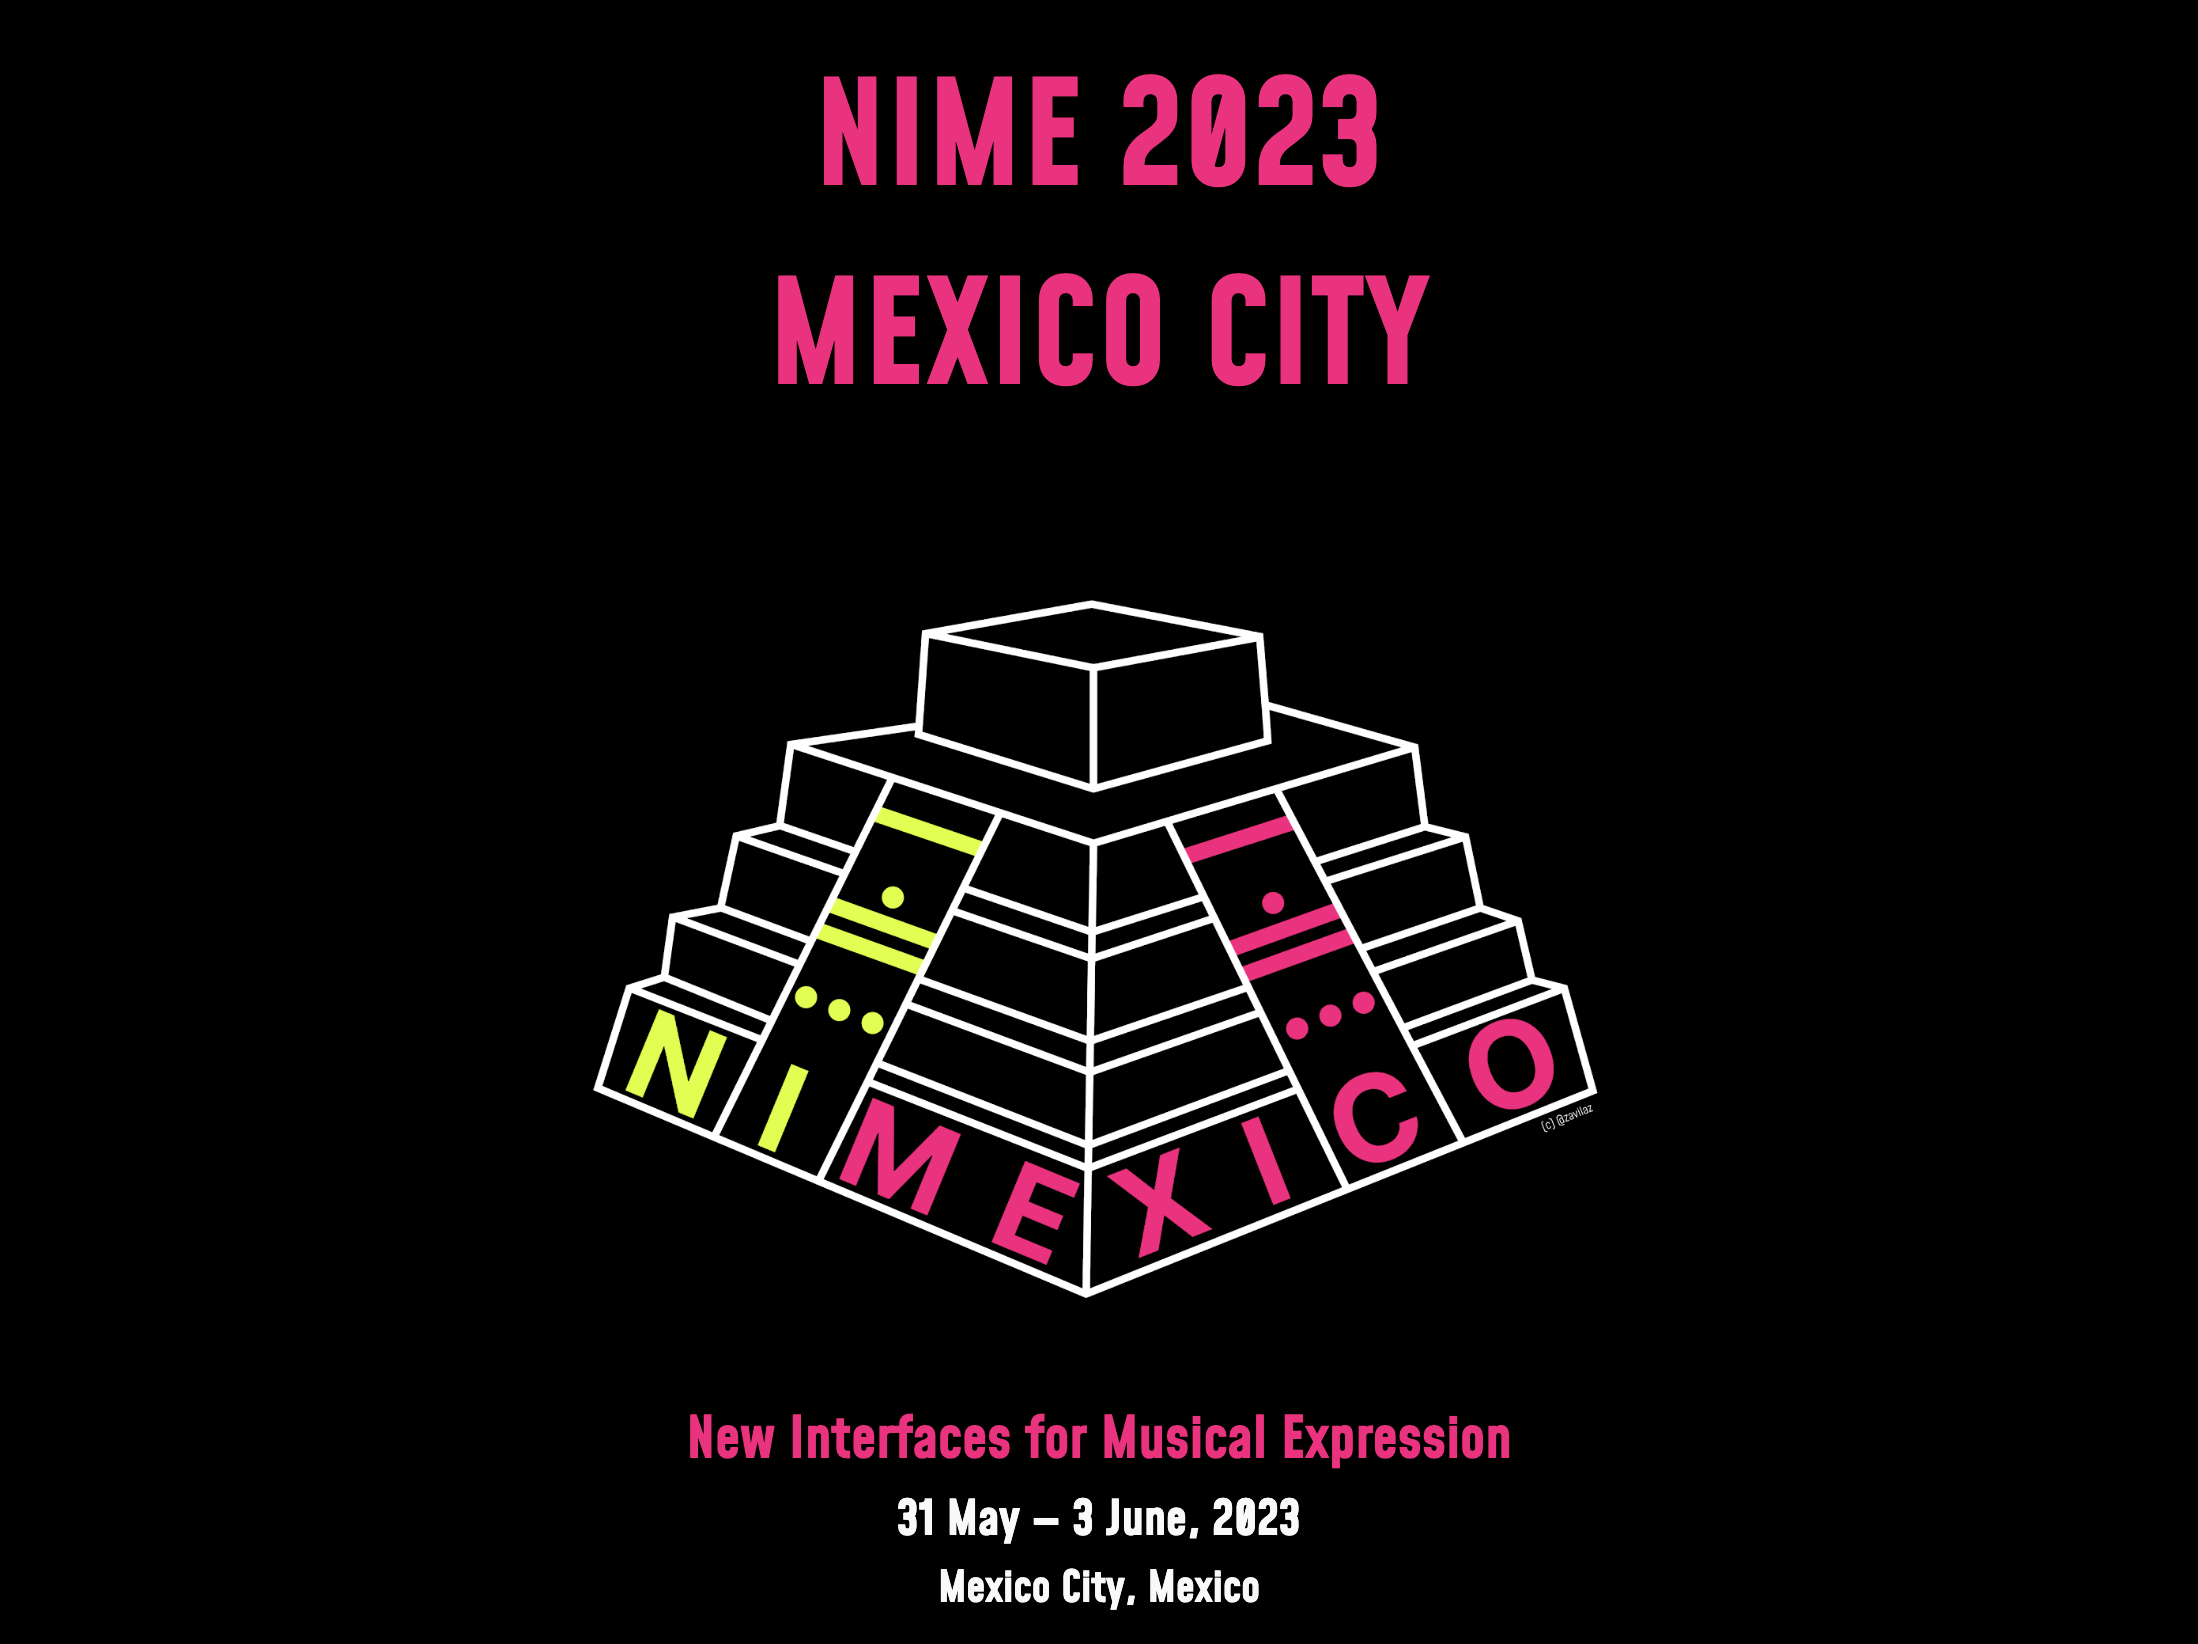 New Interfaces for Musical Expression 2023, Mexico City, Mexico